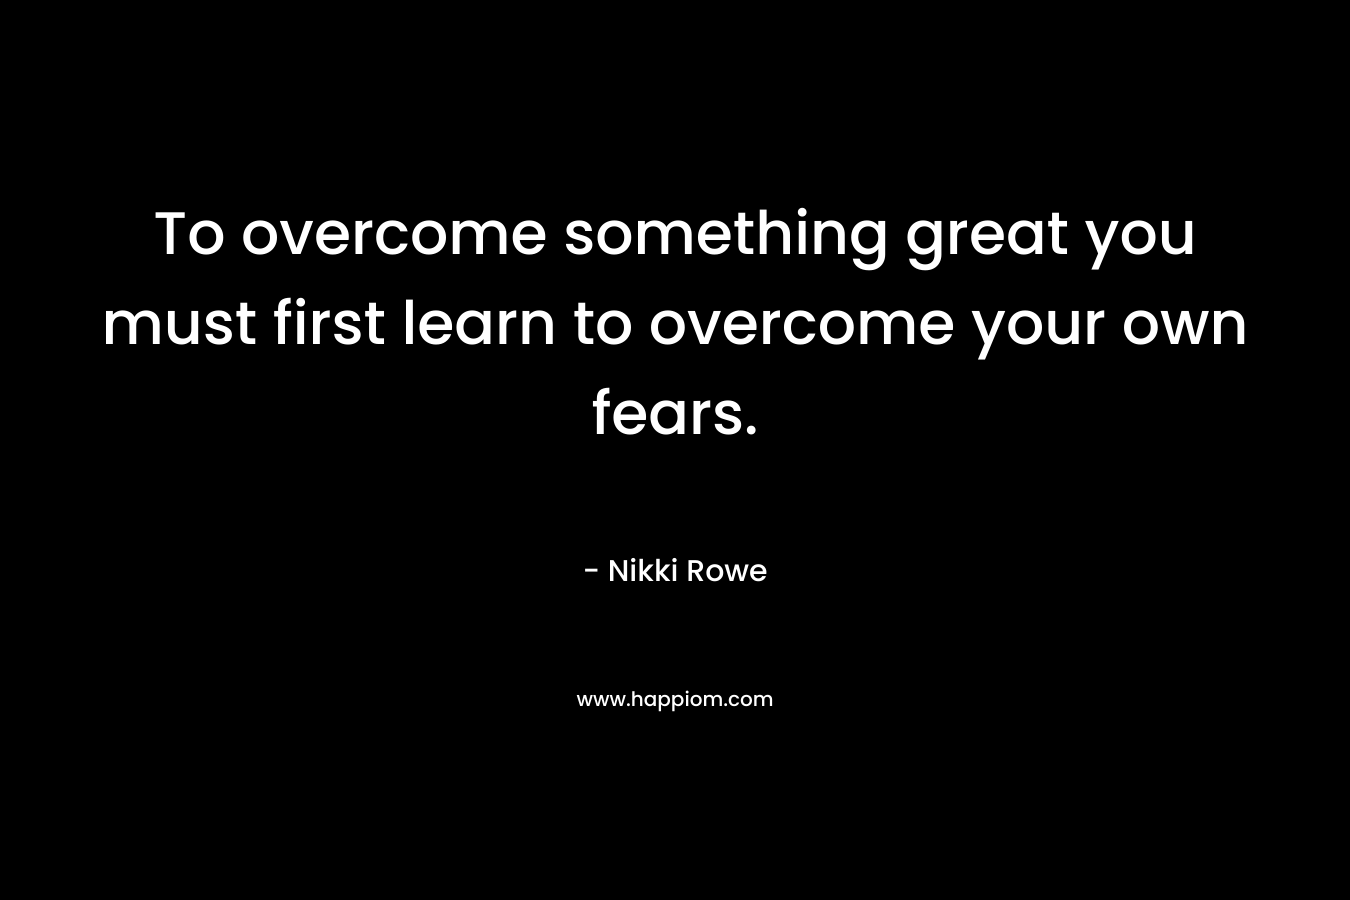 To overcome something great you must first learn to overcome your own fears.